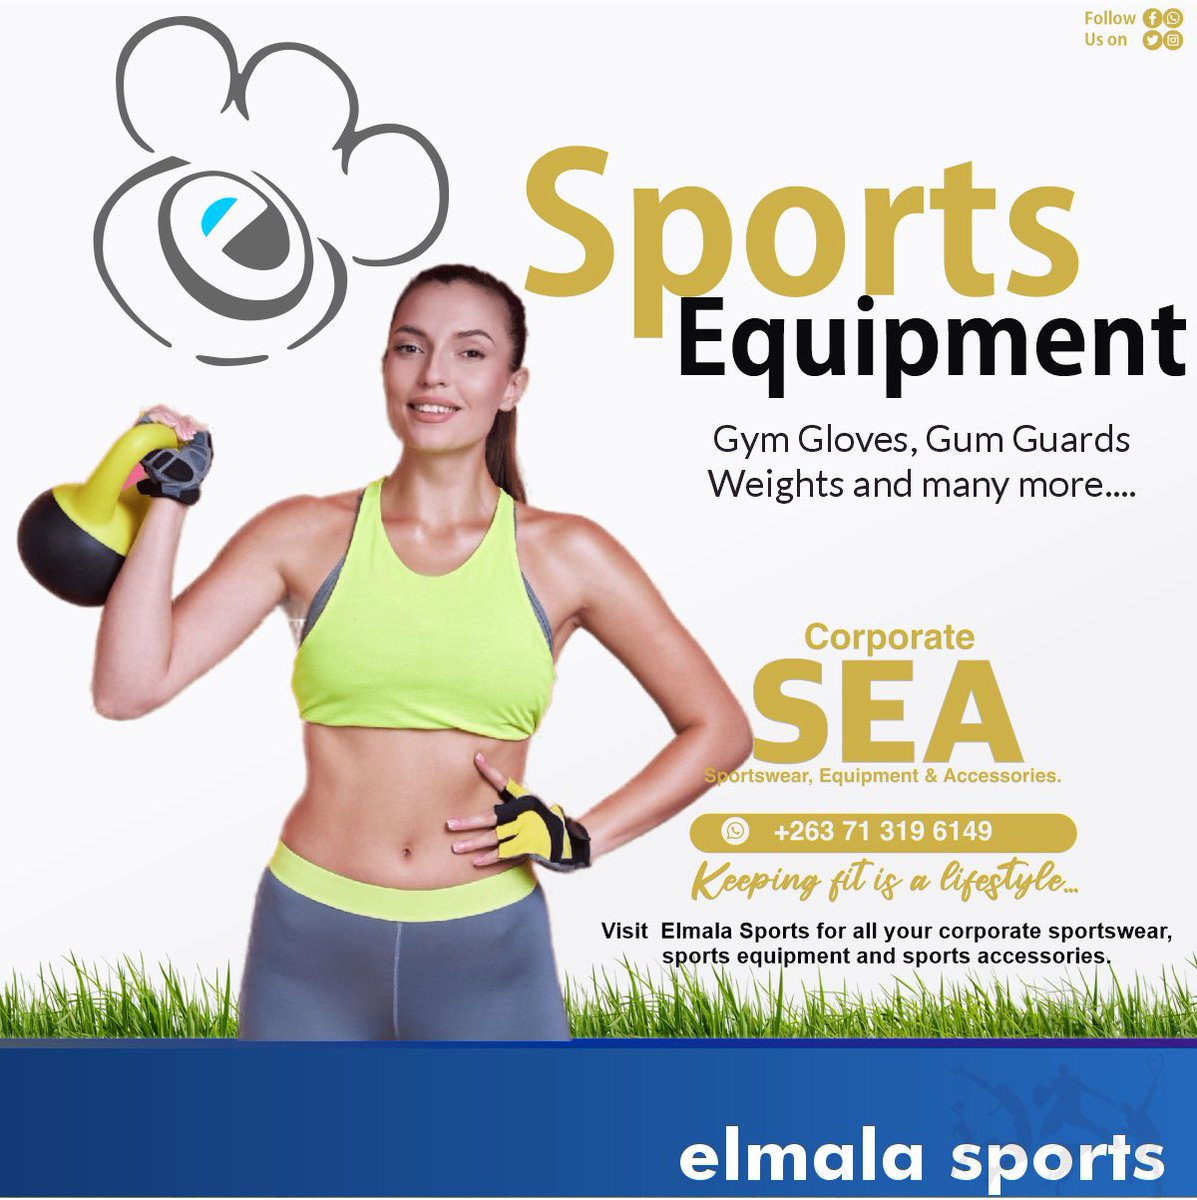 Gym Gloves
Pool Gloves
Gum Guard
All available at Elmala Sports.
#sportskit #buylocal #sportsaccessories #sportwearstore #harare #sportequipment #teamsports #sportsequipment #elmalasports #soccerballs #sportswearshop #fortheloveofthegame